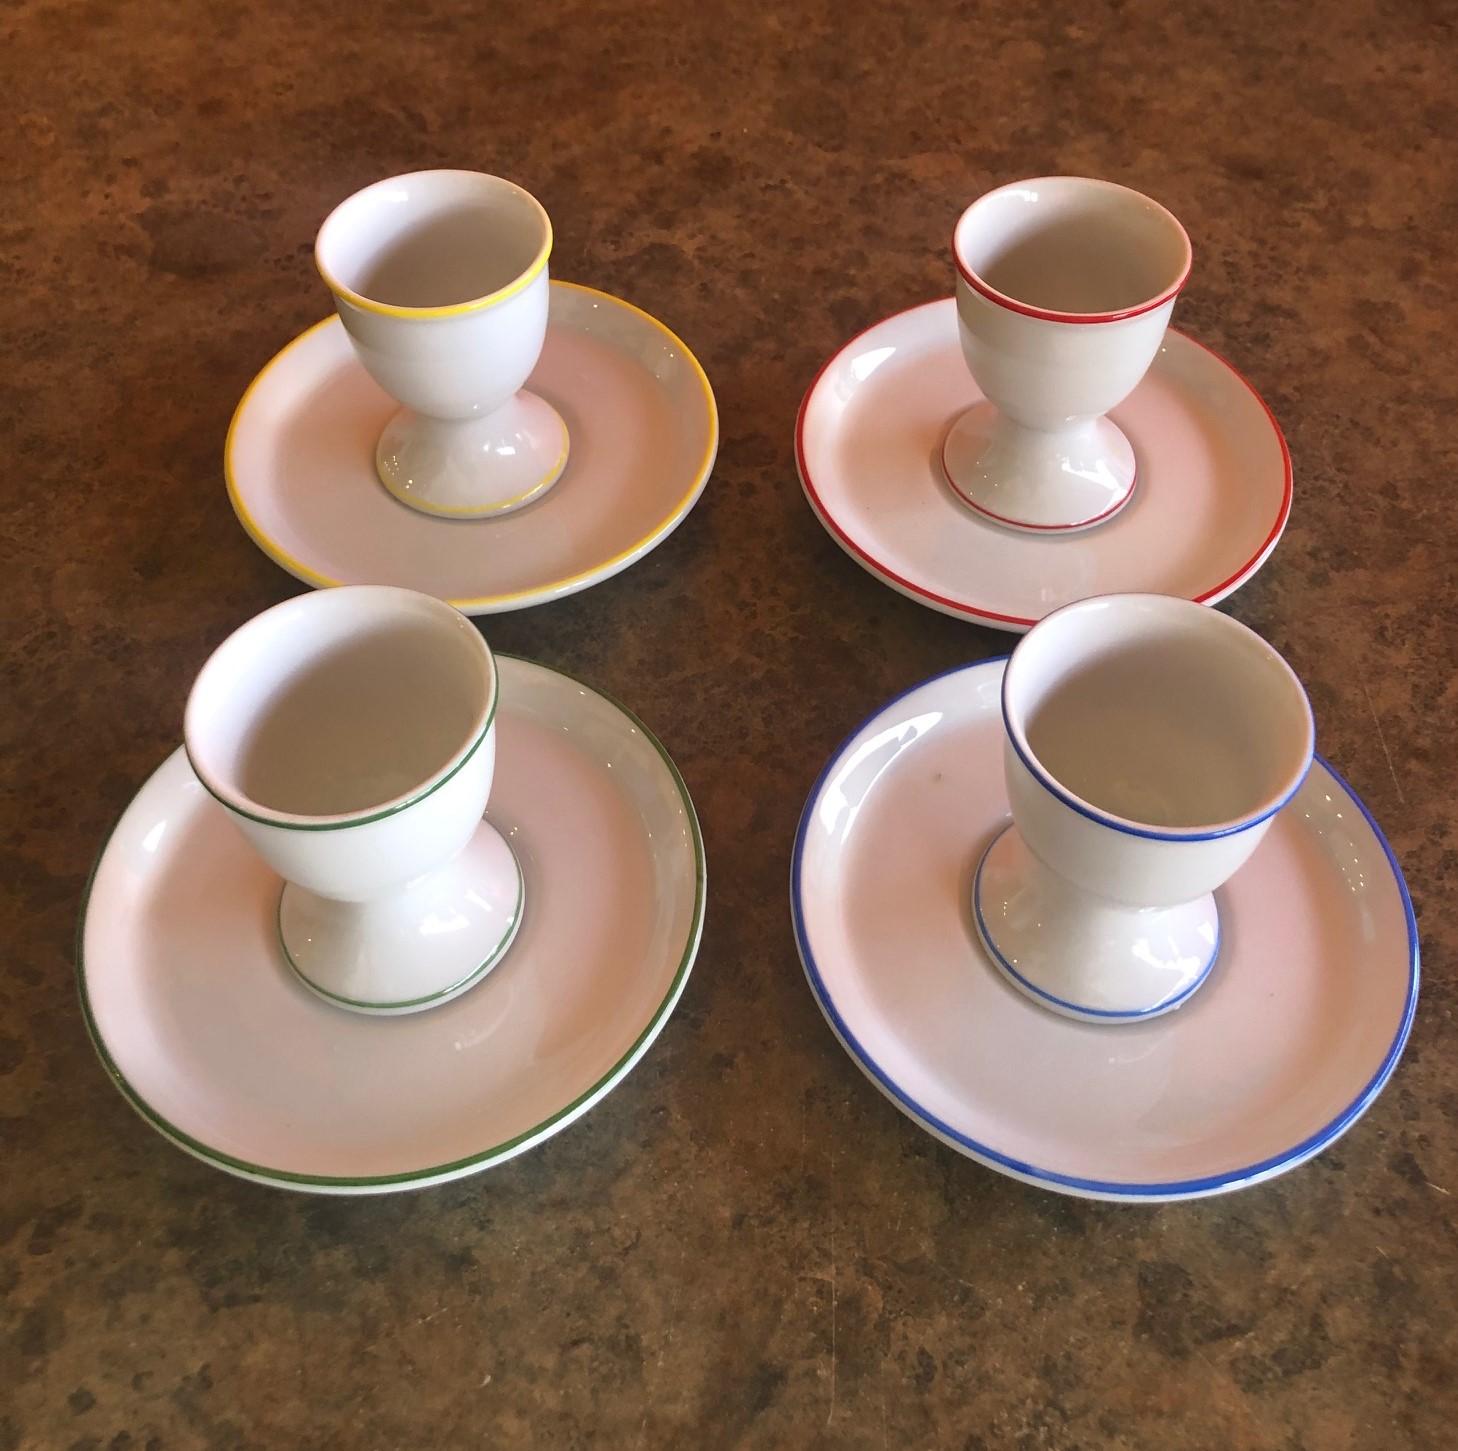 Stylish set of four Neiman Marcus egg coddlers with under plates, circa 1980s. The set is 